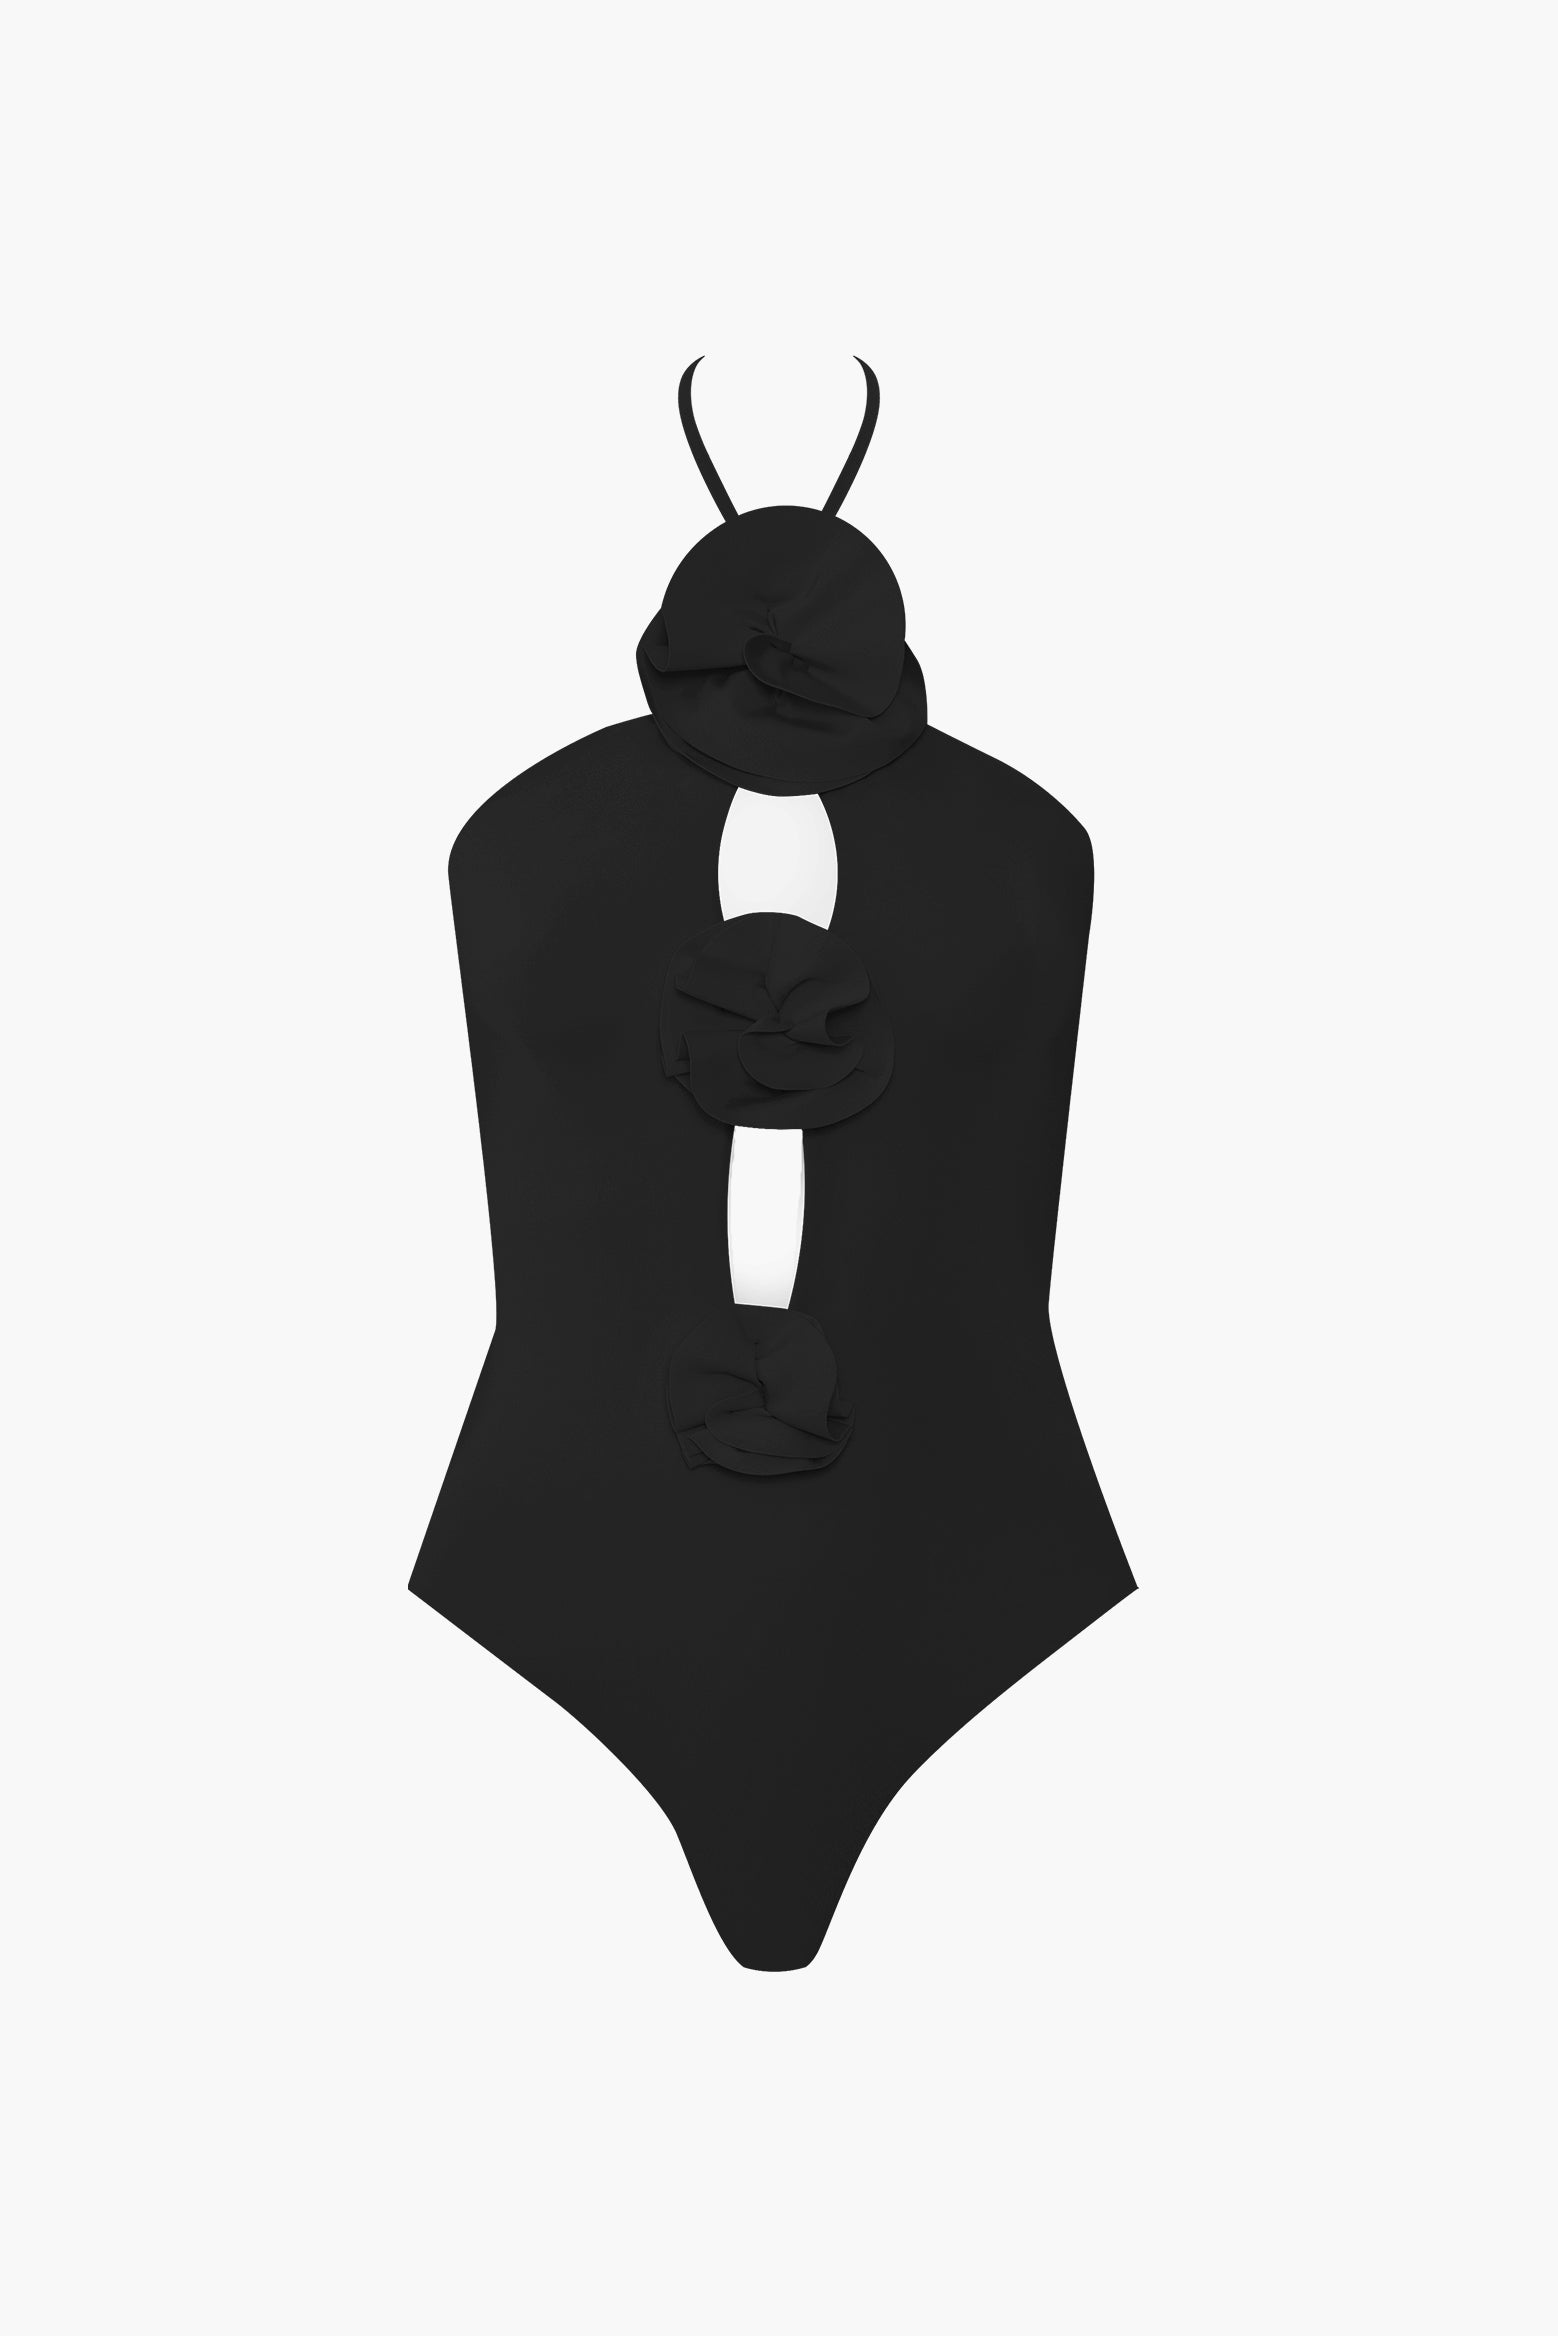 Maygel Coronel Fiora Swimsuit in Black available at The New Trend Australia. 